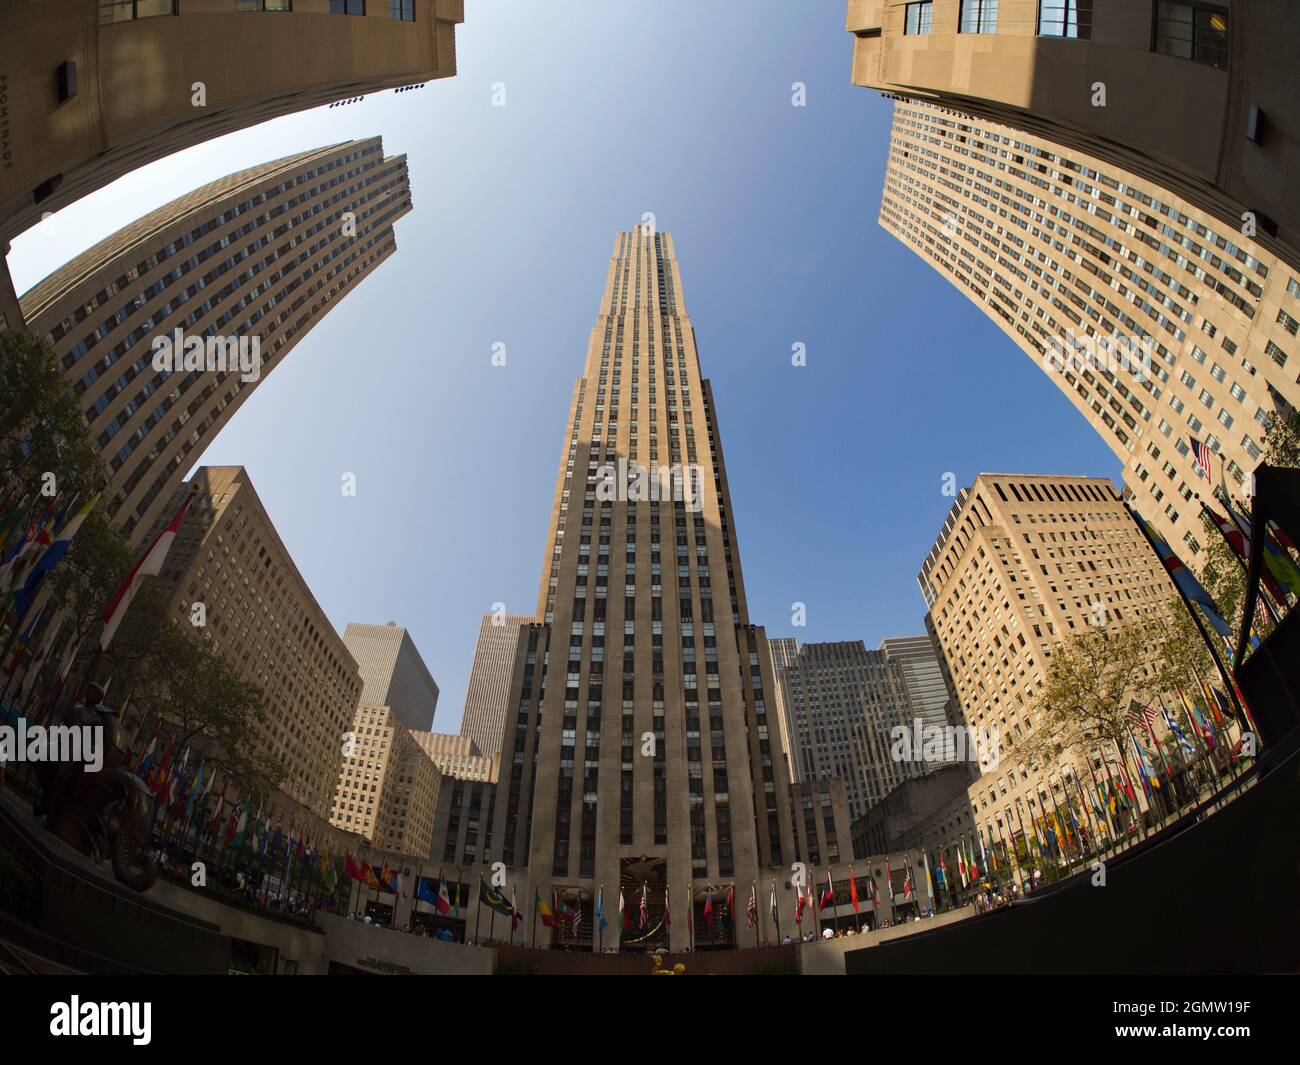 New York, USA - 11 April 2013; no people in view. An iconic piece of New York grandiose architecture, the Rockefeller Center is a large complex of com Stock Photo